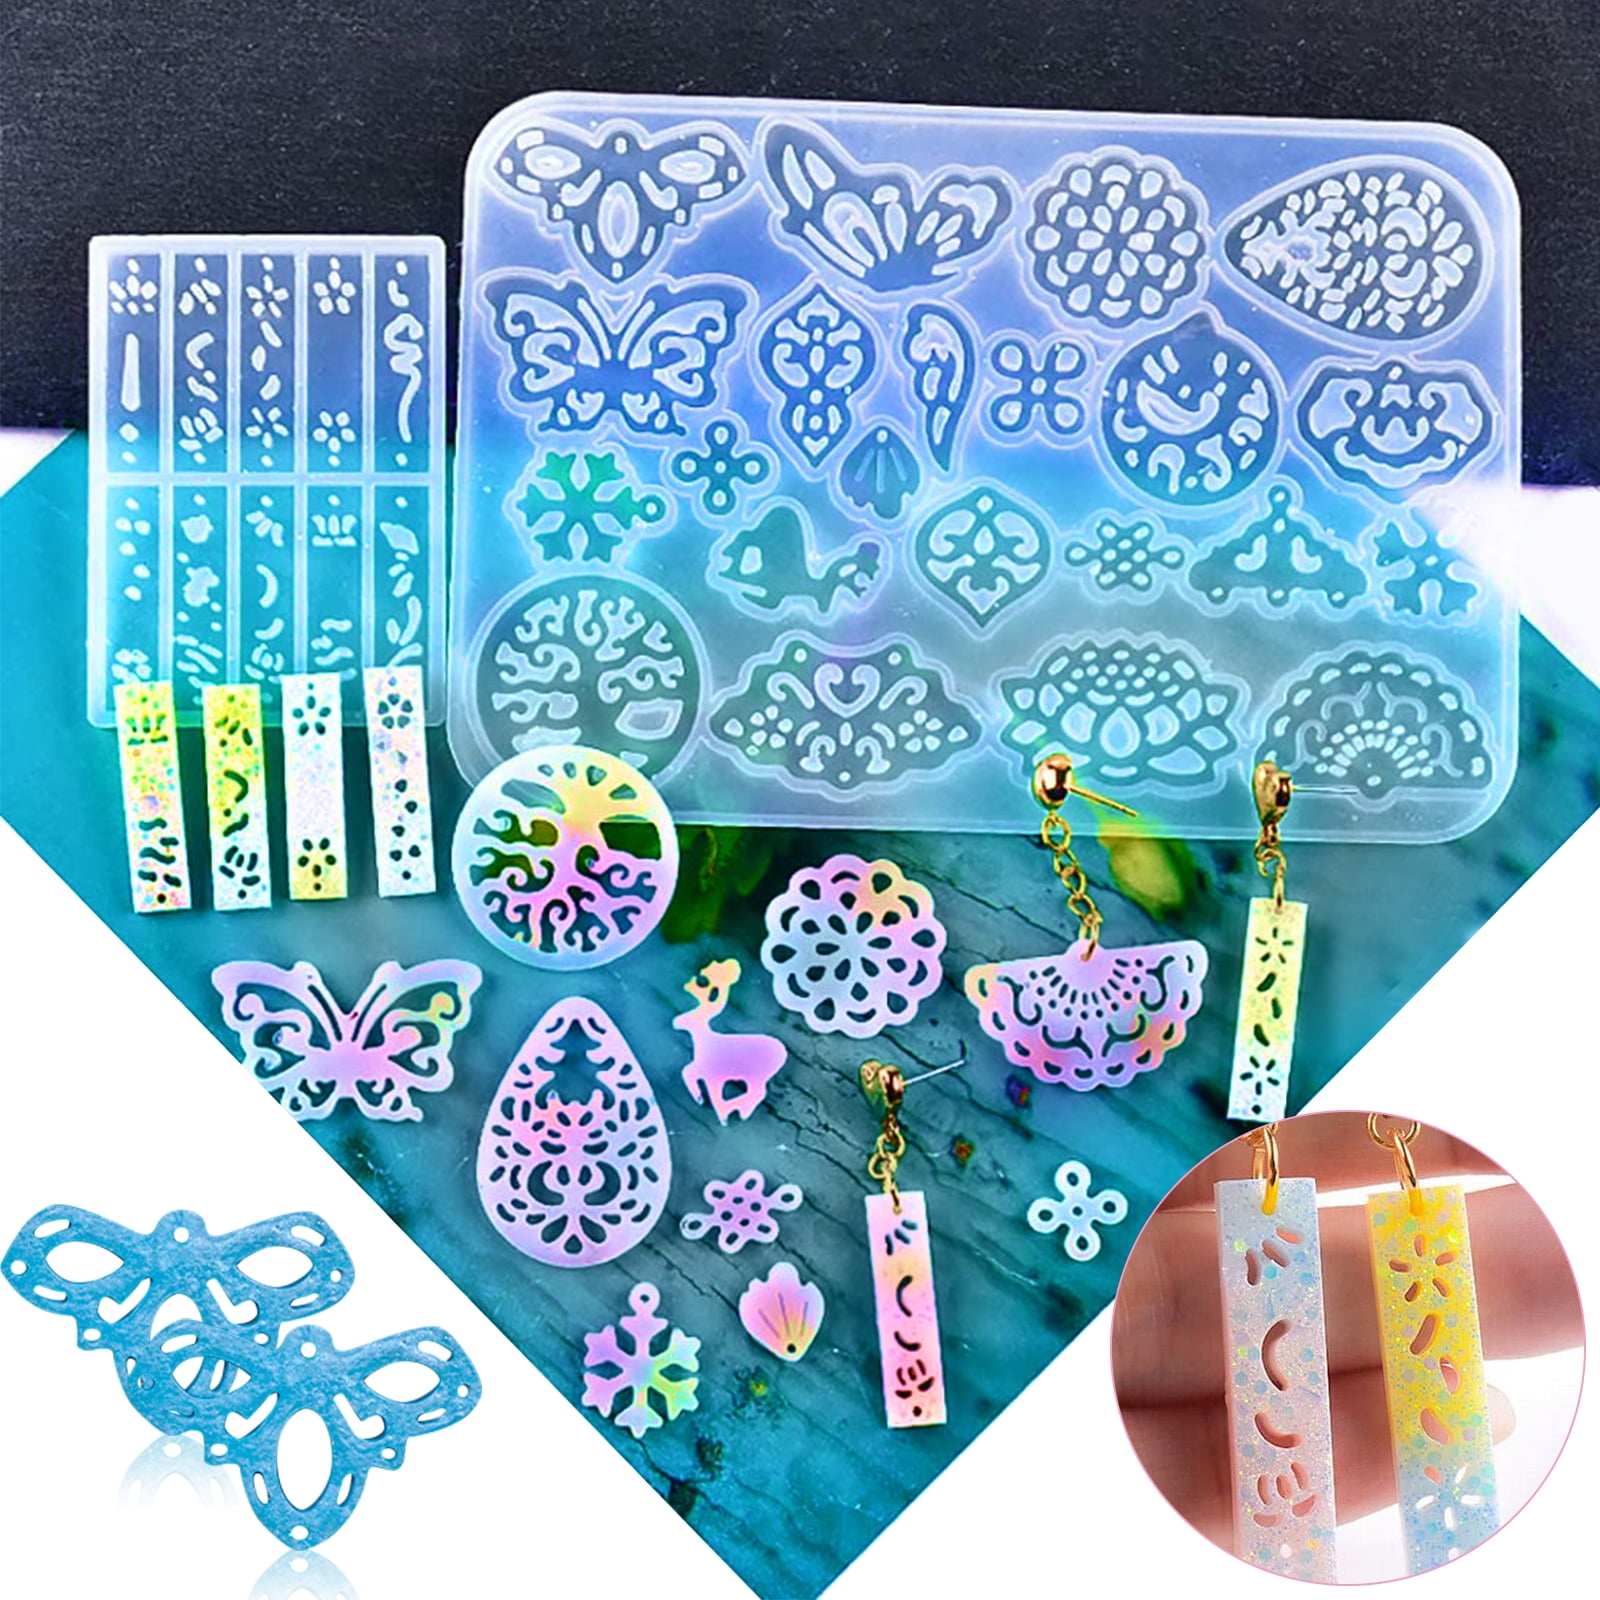 2 Pcs Jewelry Resin Molds FineGood Resin Mold Silicone Gem Jewelry Casting  Re